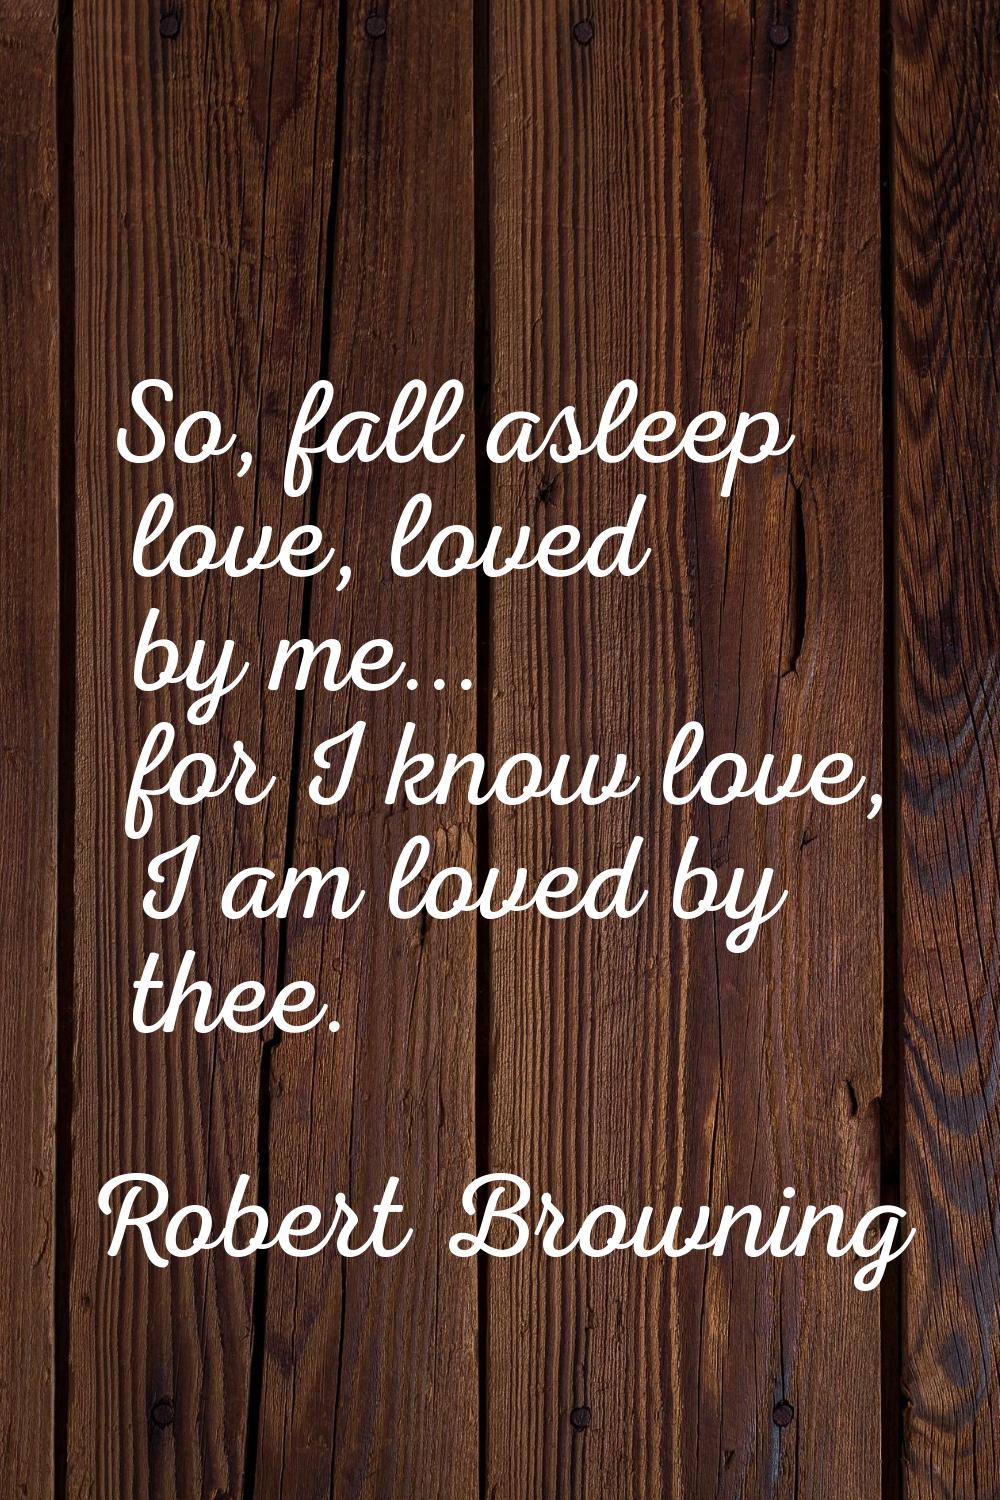 So, fall asleep love, loved by me... for I know love, I am loved by thee.